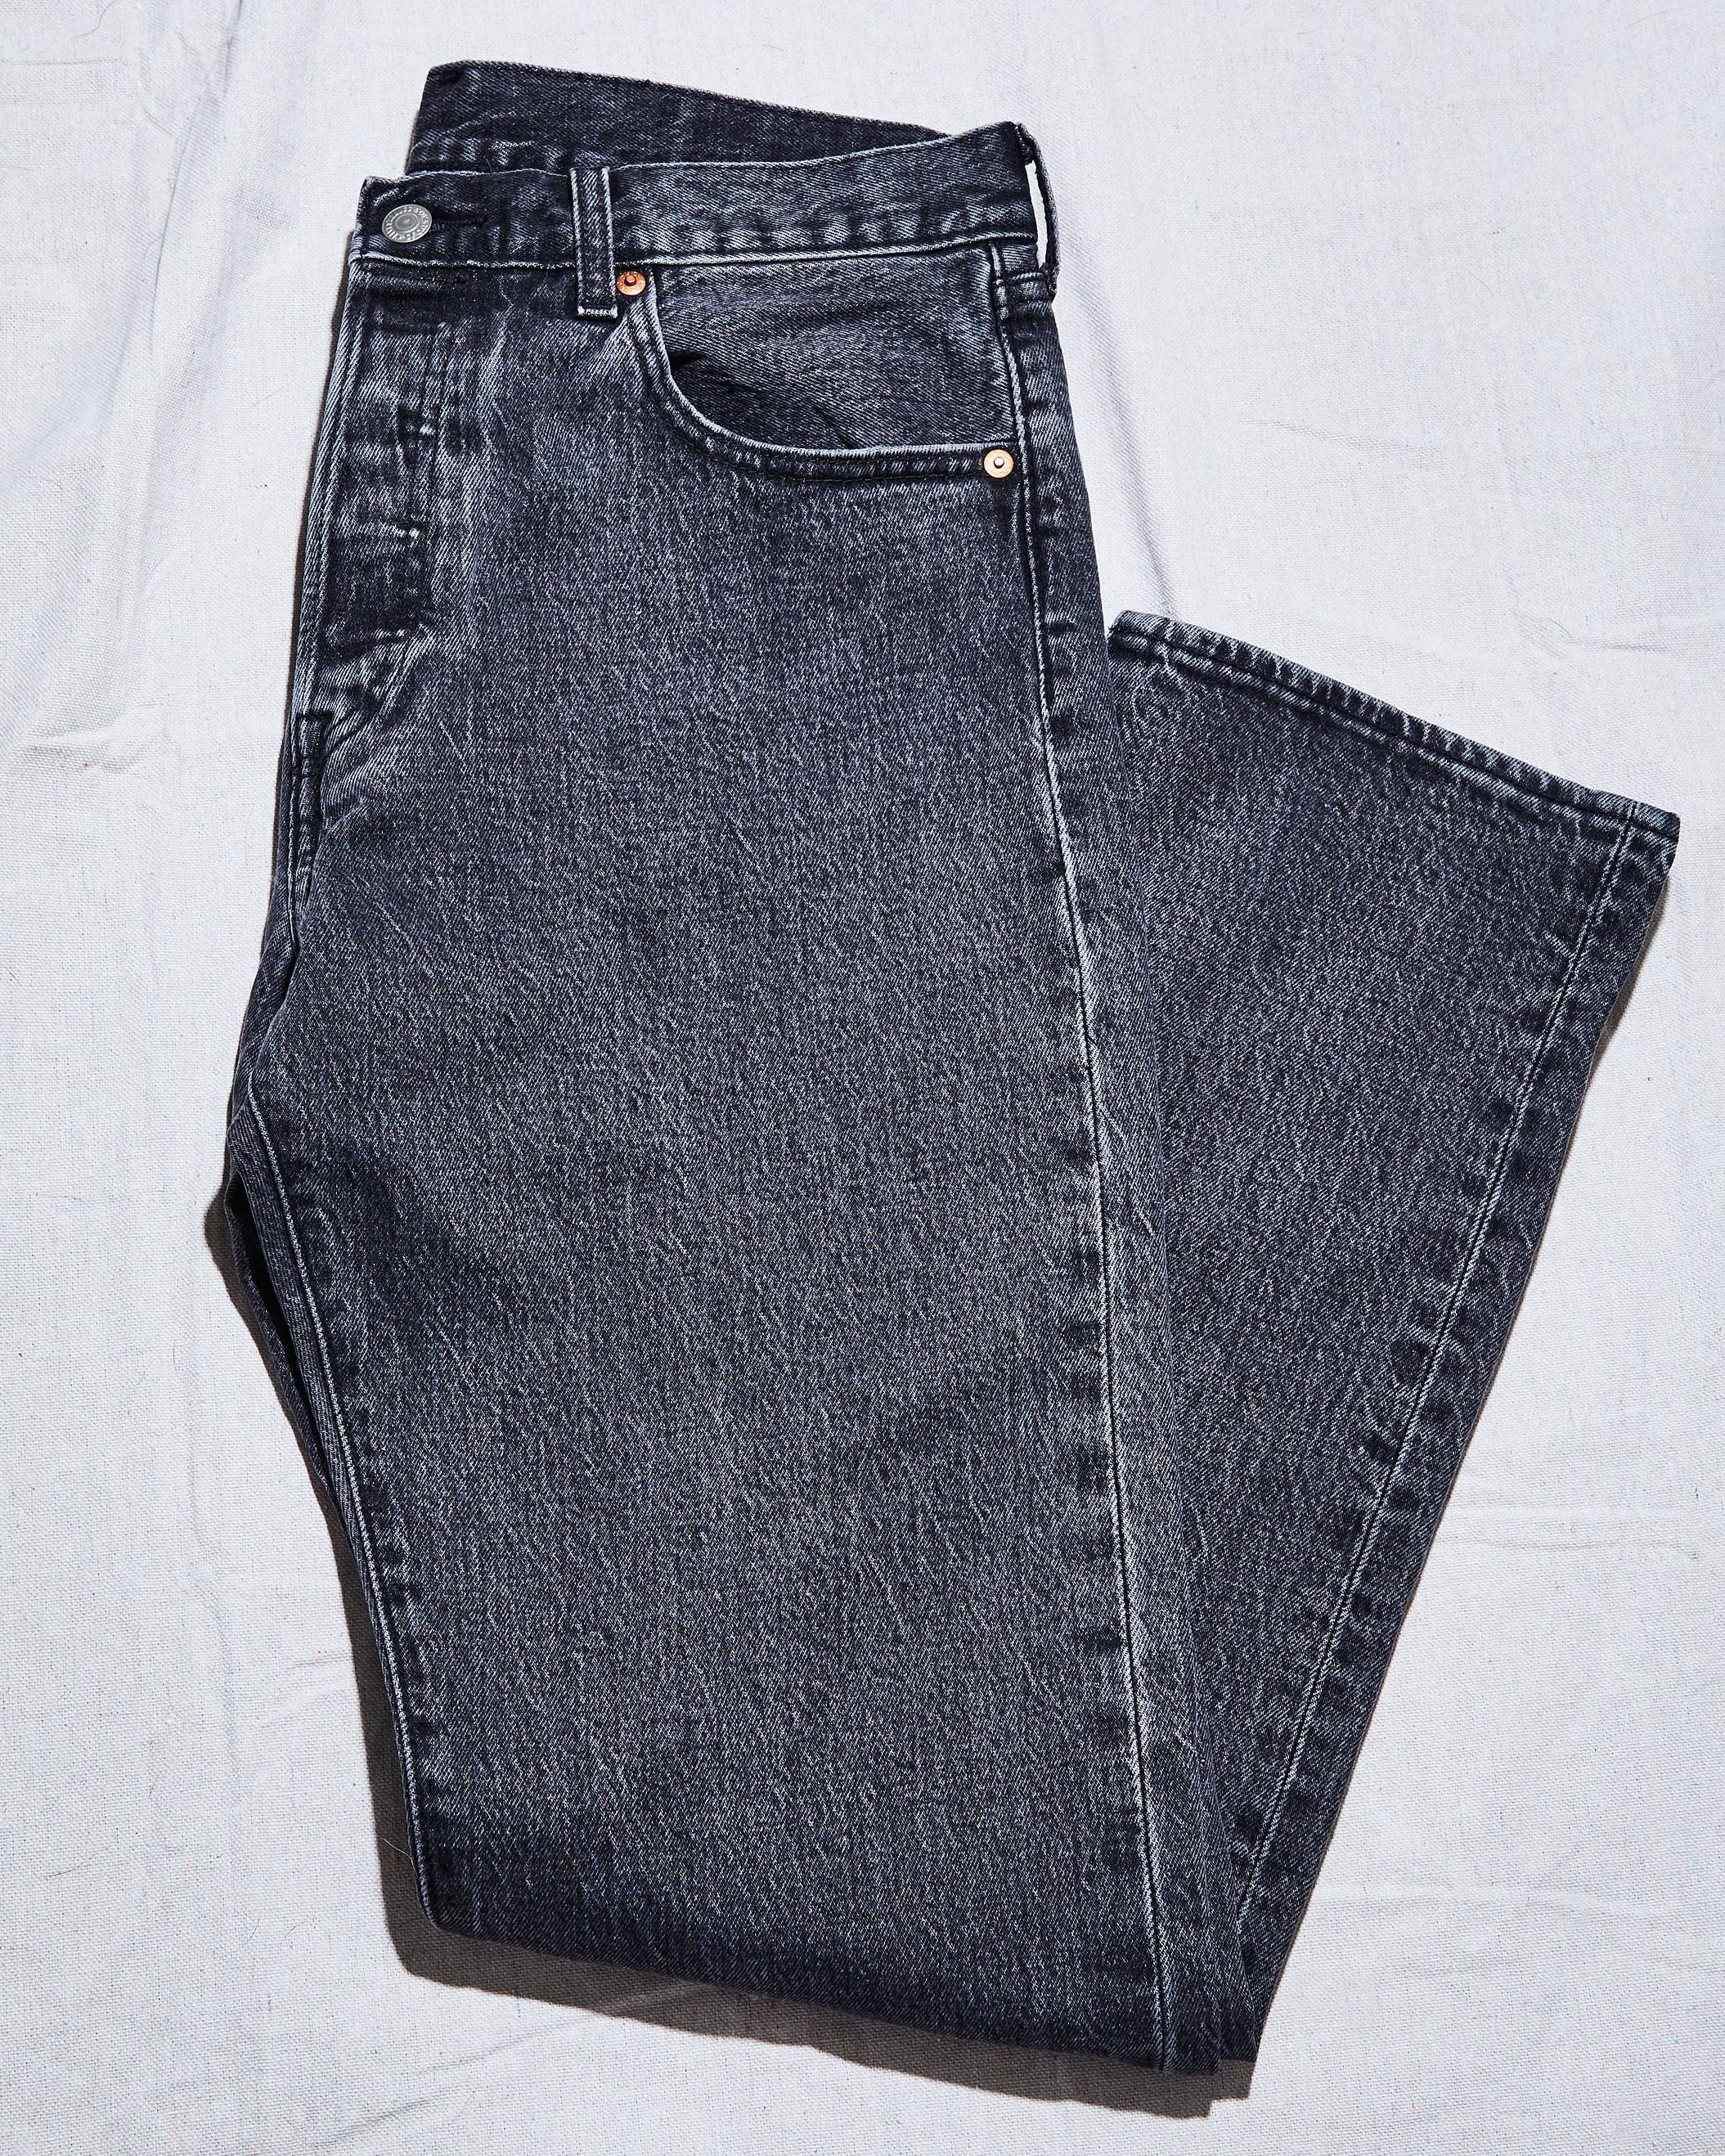 Levi's 501 '93 Jeans Review and Endorsement